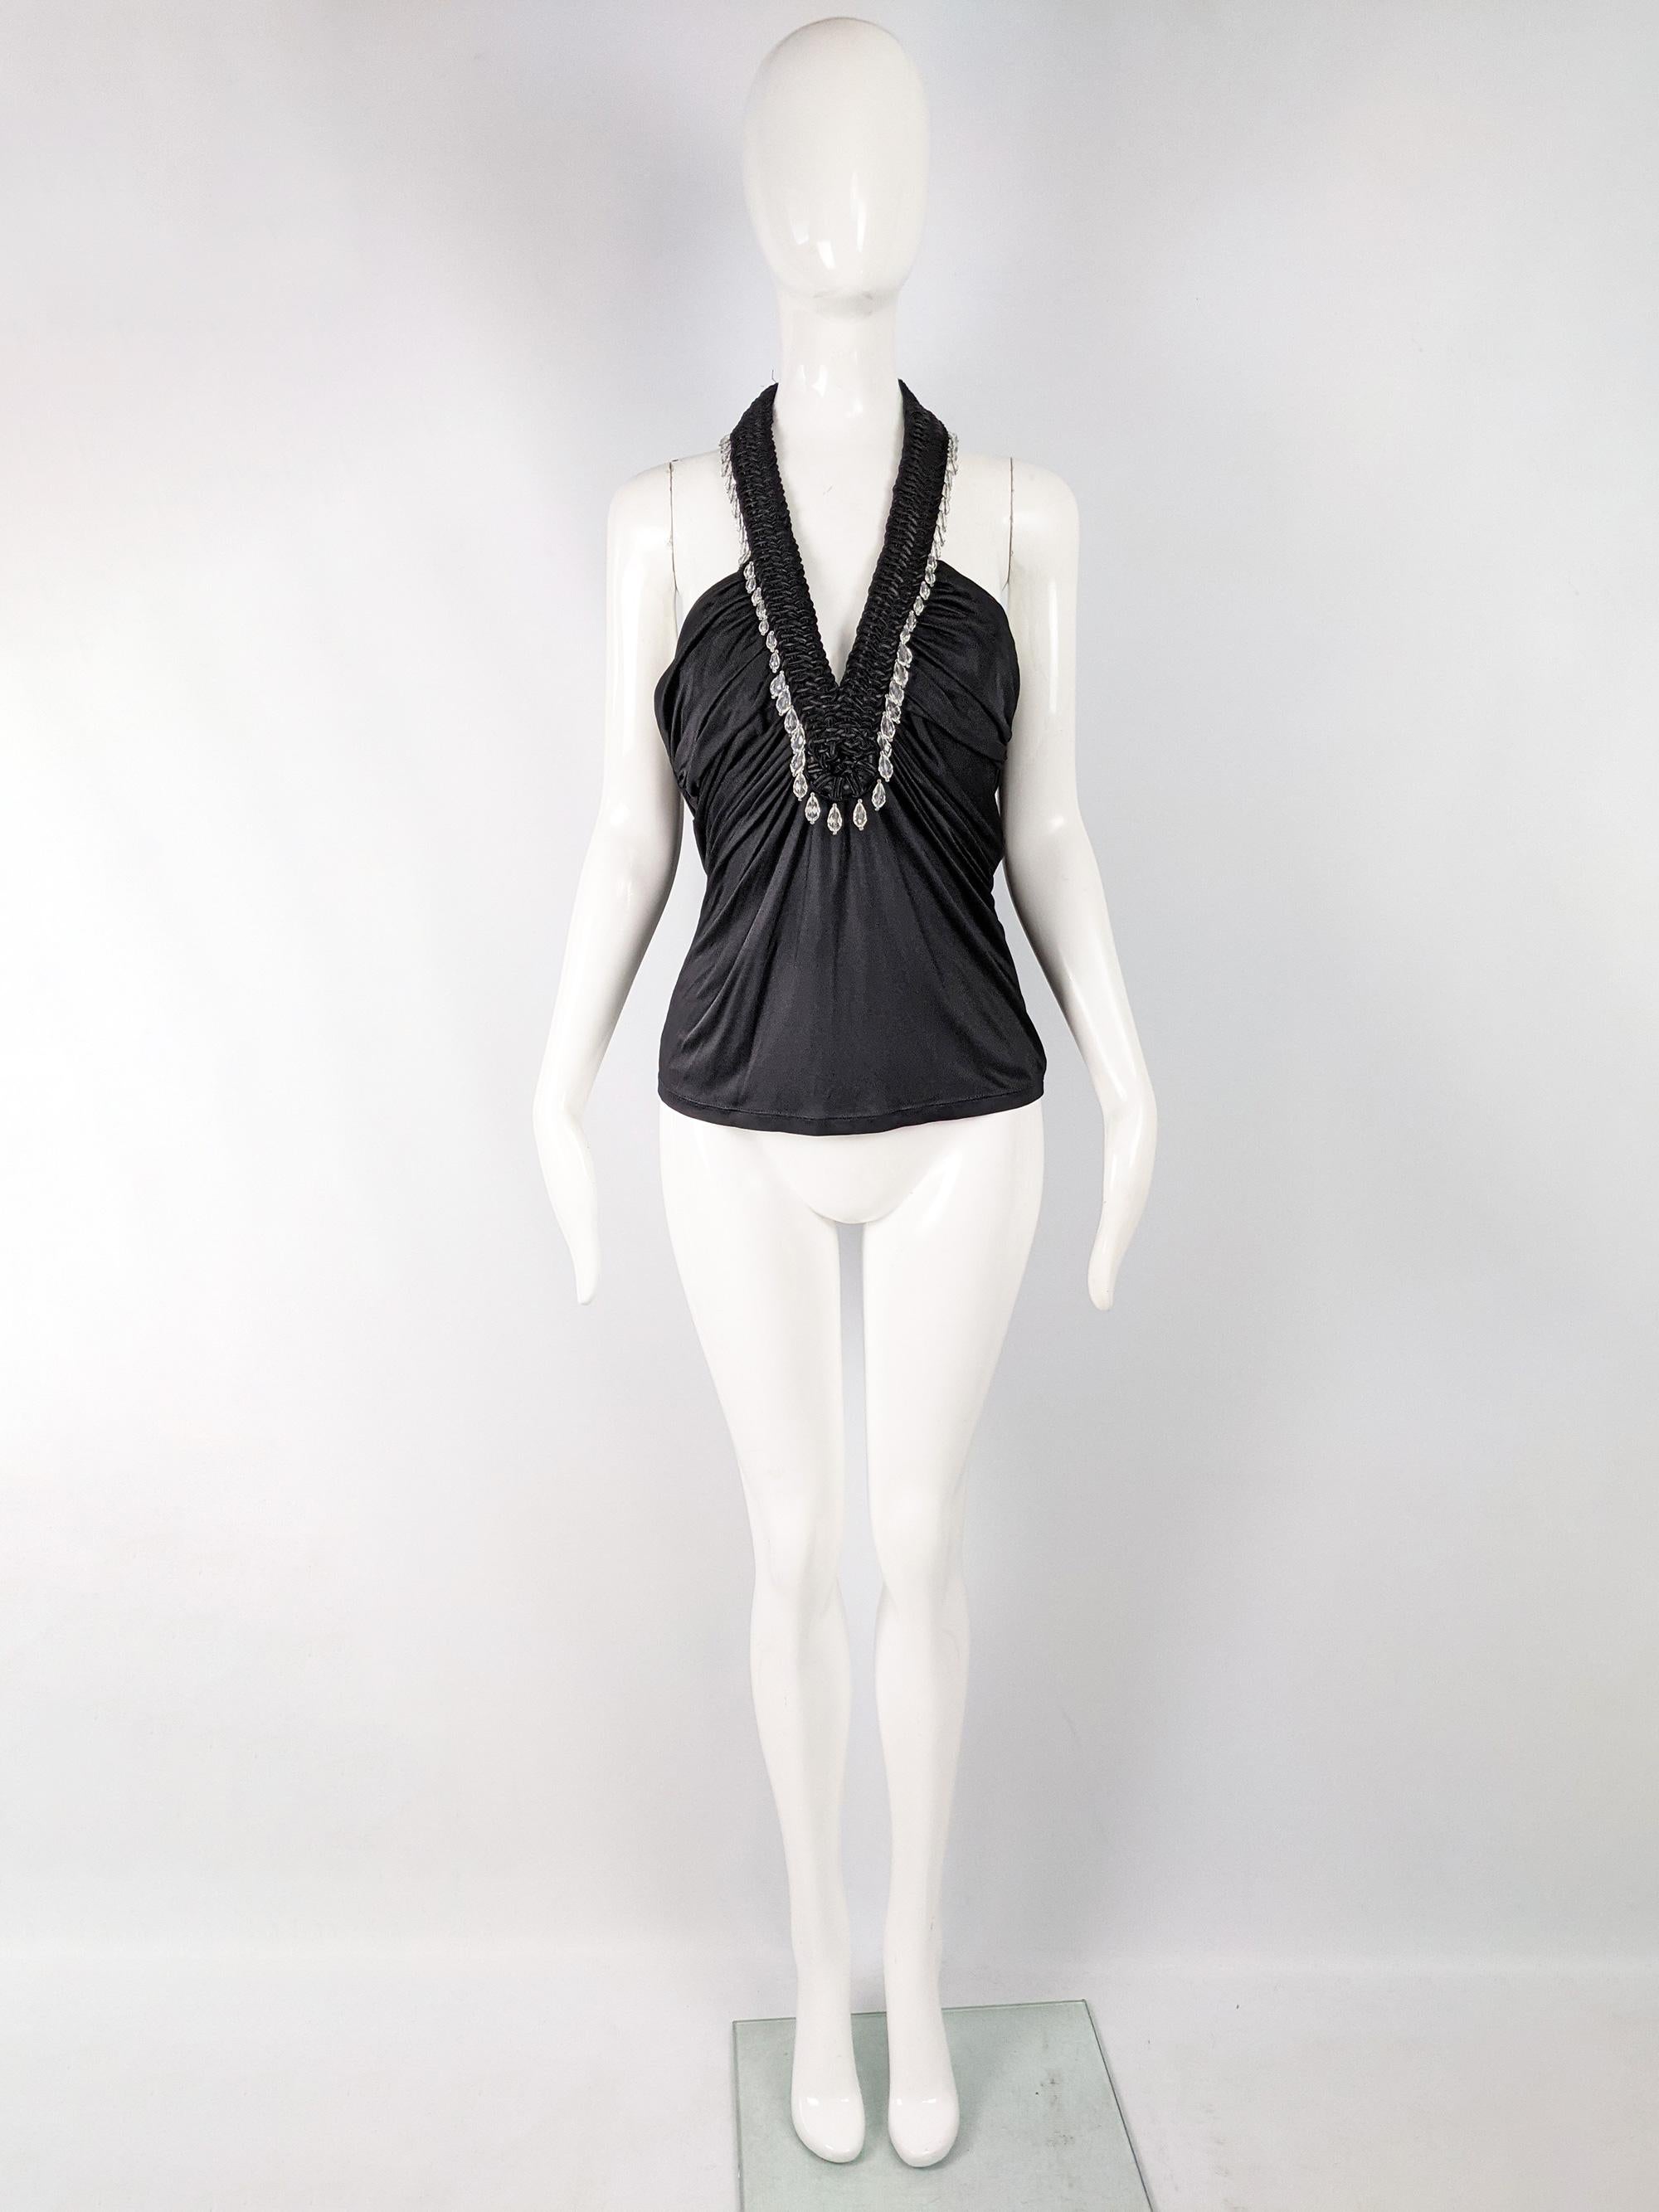 A stunning vintage womens mainline Versace top from the Spring Summer 2006 collection. It is made from a beautifully draped black jersey with a structured, braided halter neck trimmed with teardrop beads. Perfect for a party or evening event.